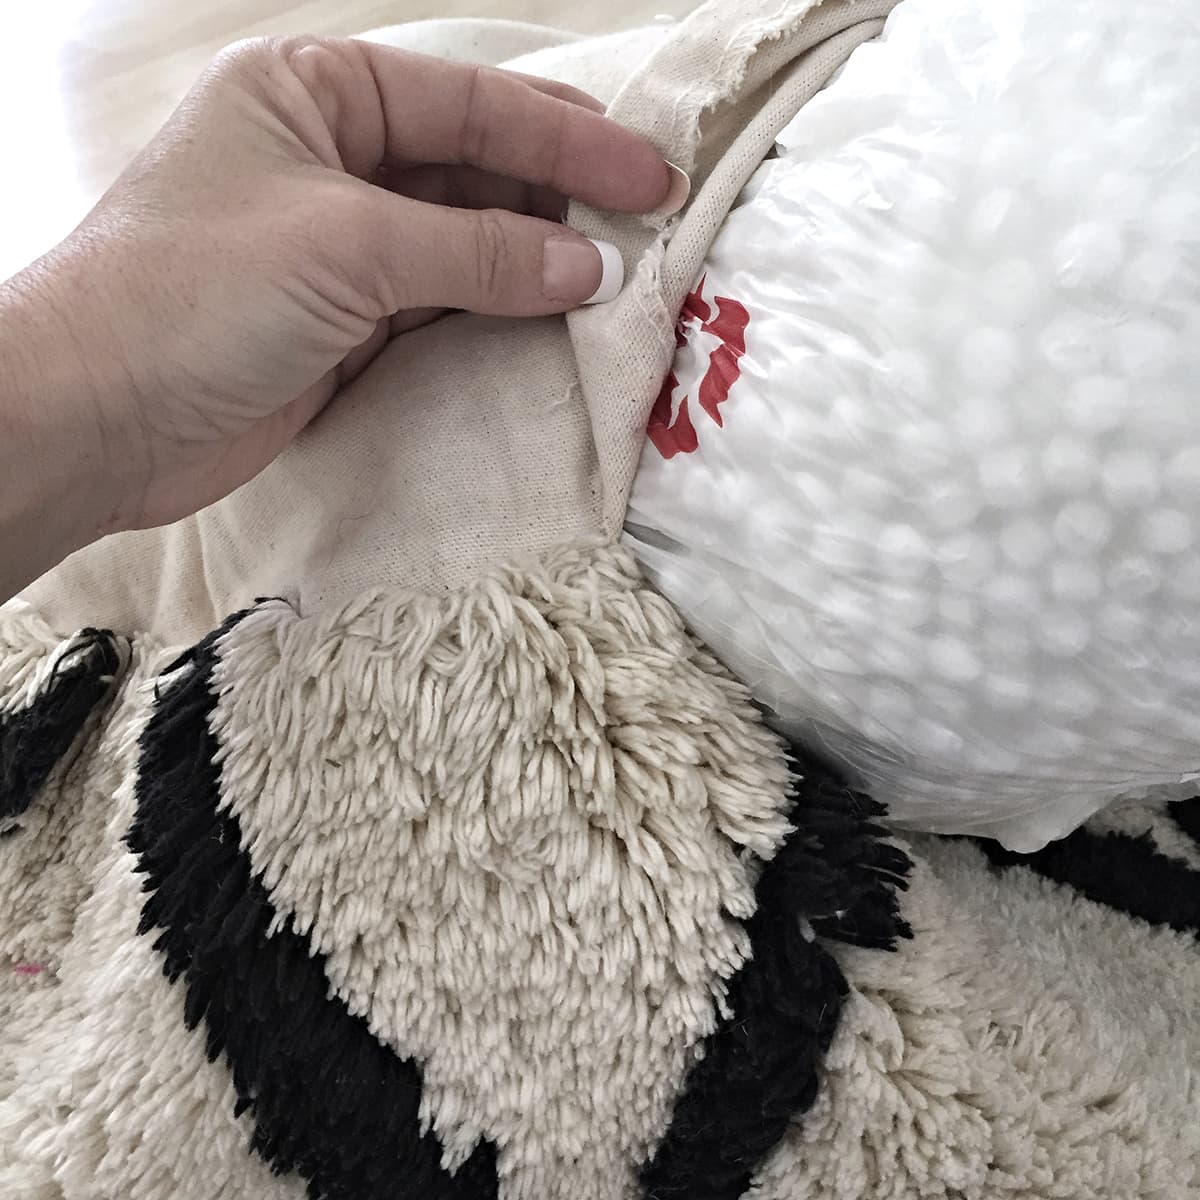 stuffing a closed grocery bag with bean bag filling into pouf opening